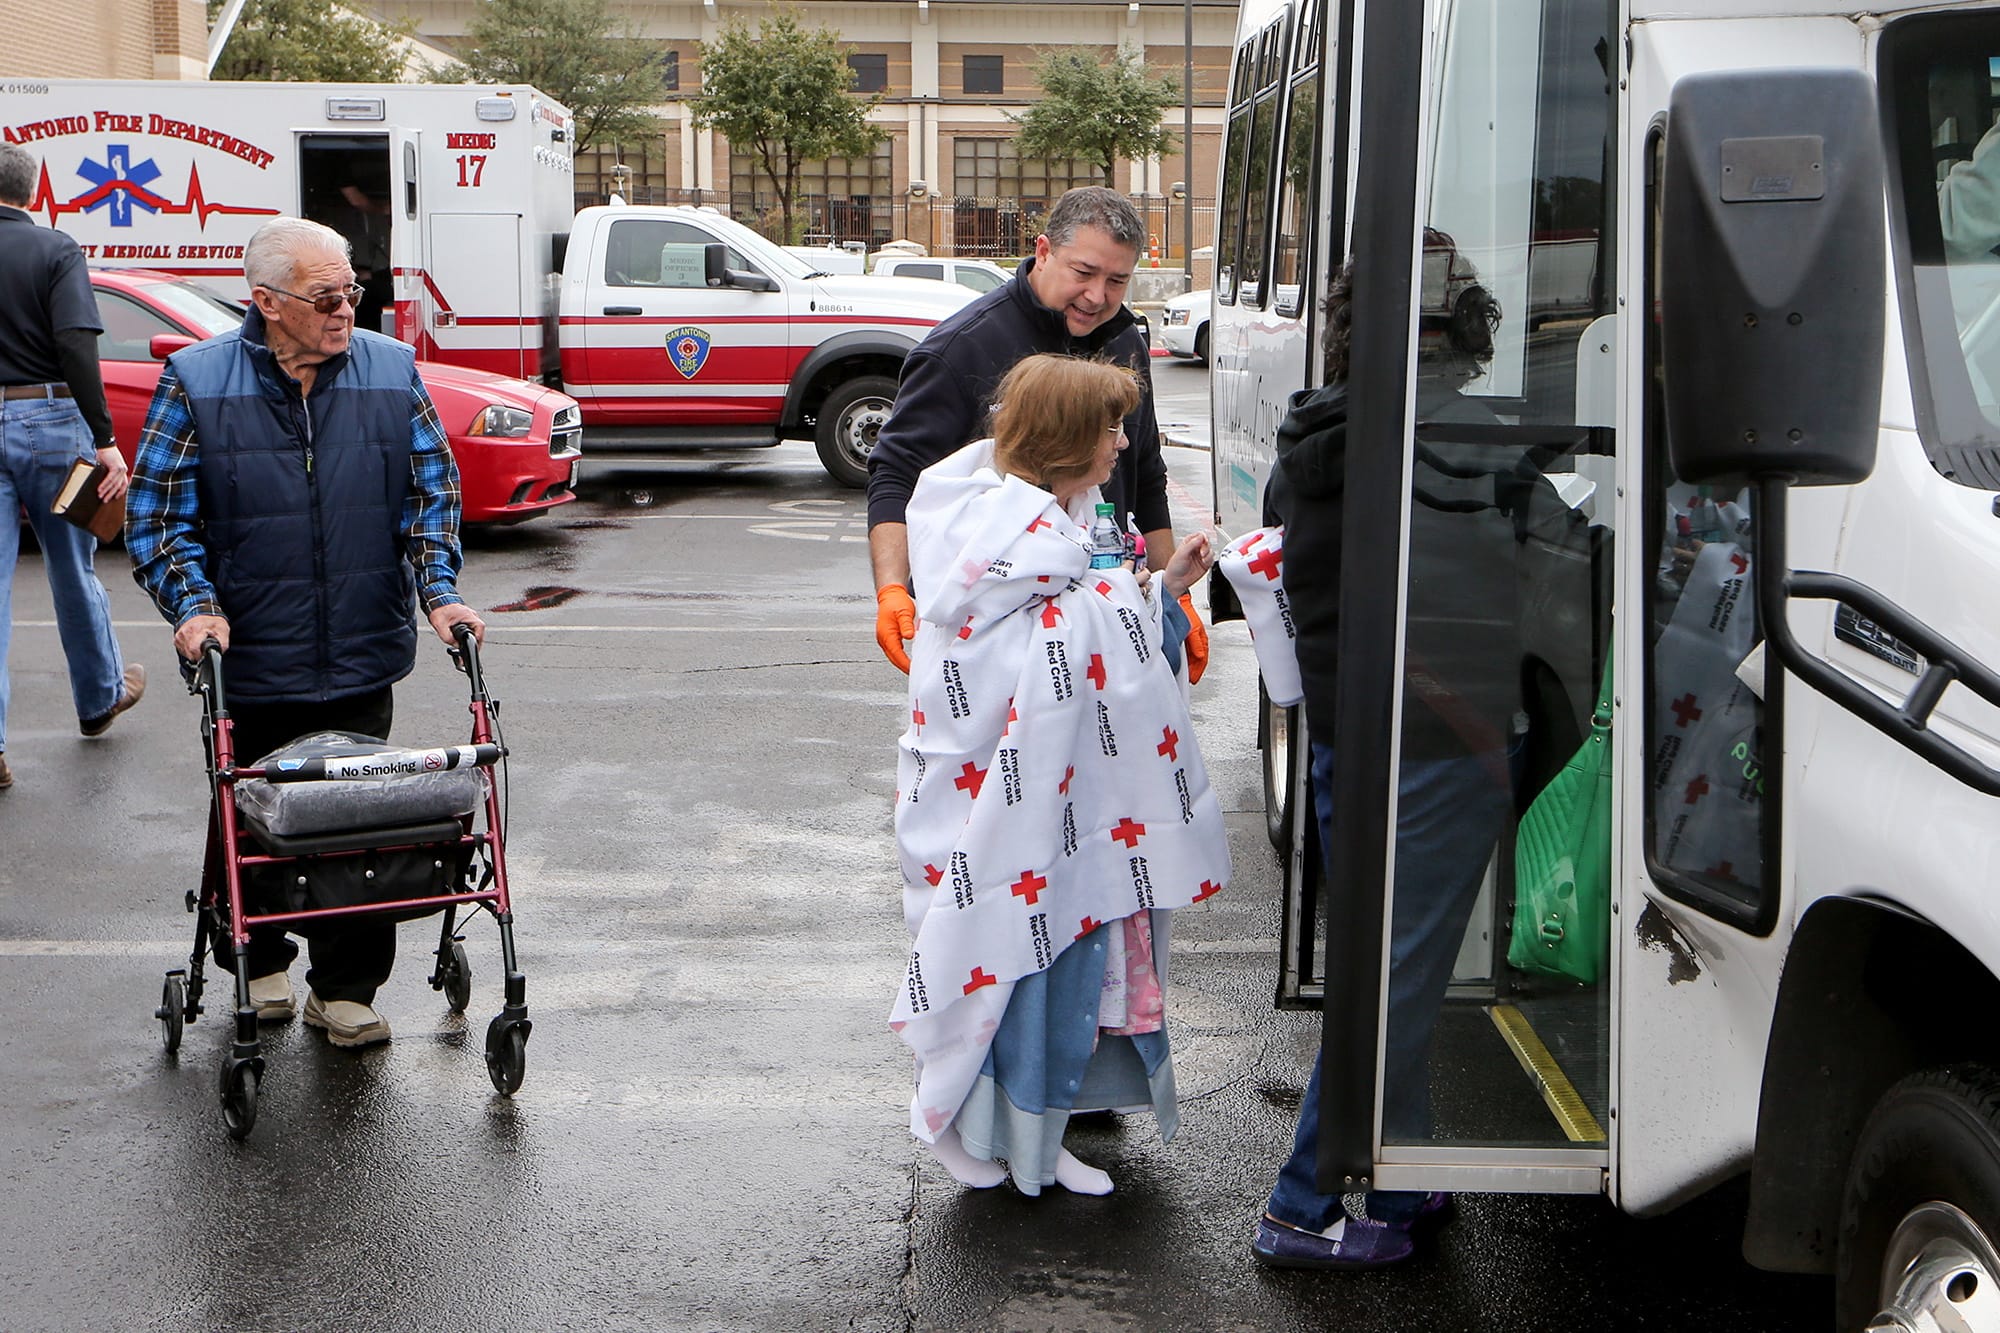 Residents of the Wedgwood Senior Apartments are moved to other locations after being evacuated to Churchill High School following a three-alarm fire at the apartments, Sunday, Dec. 28, 2014 in San Antonio, Texas.